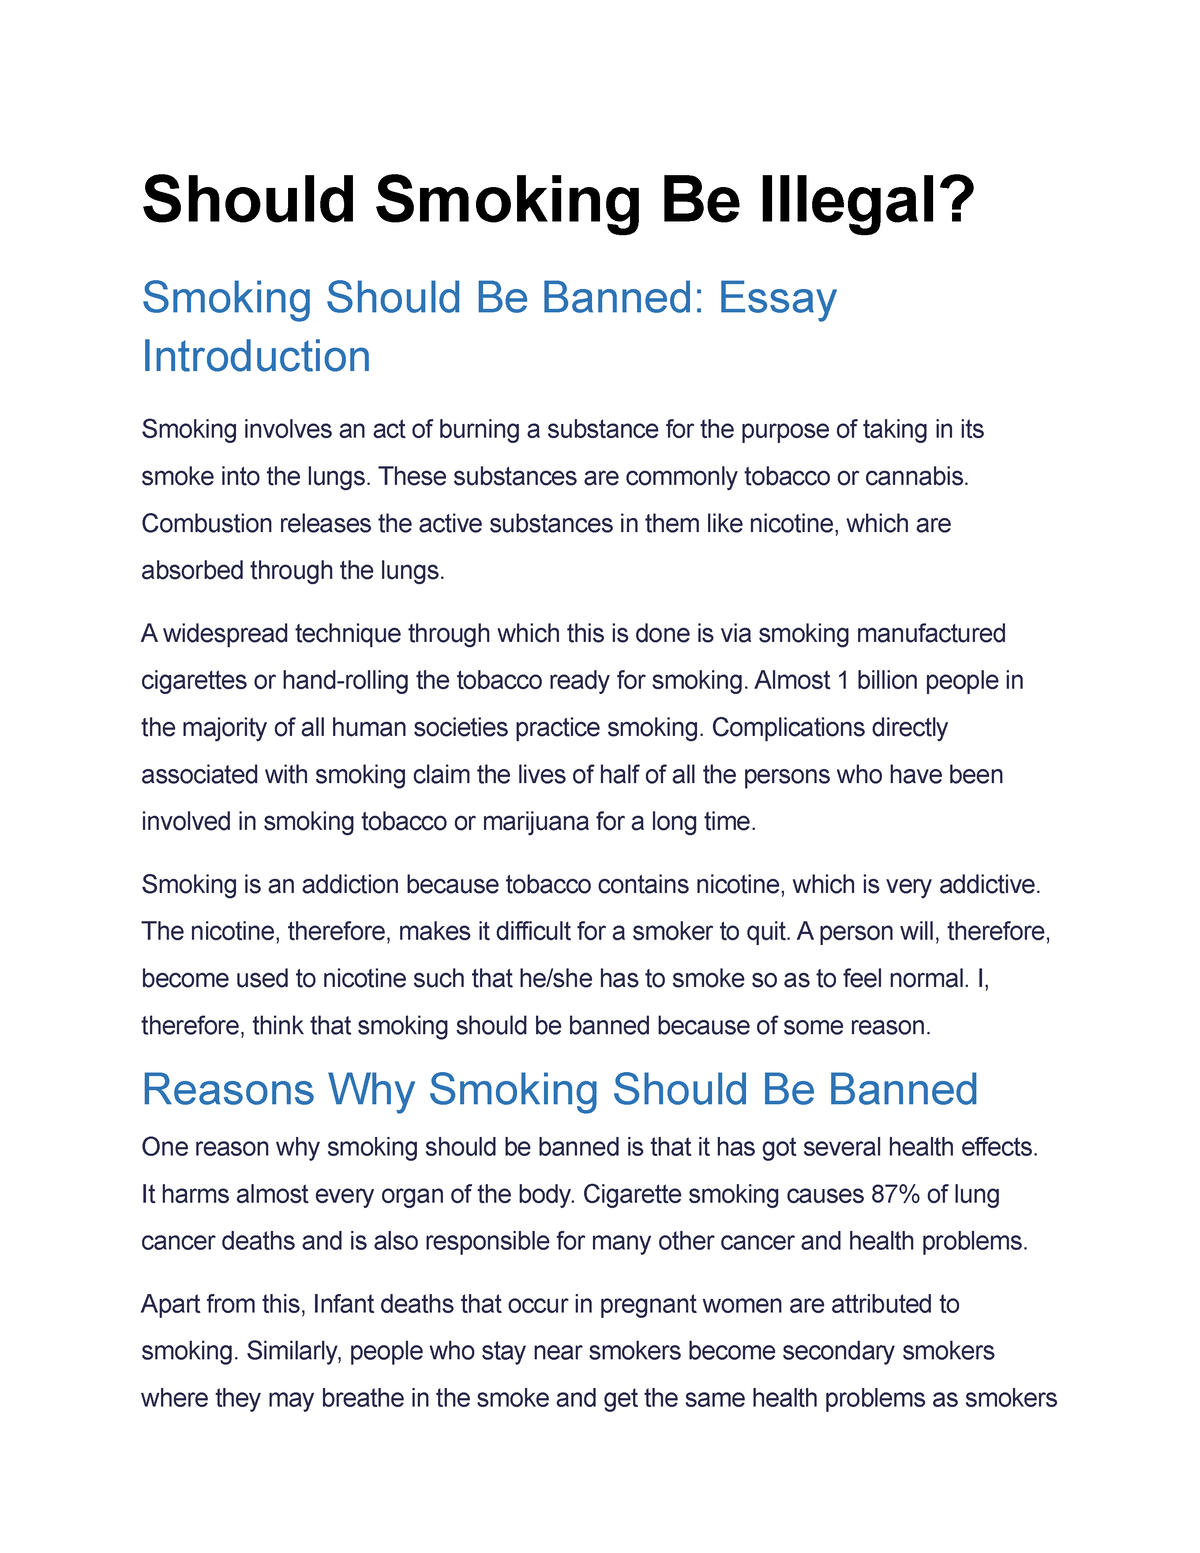 essay smoking should be banned